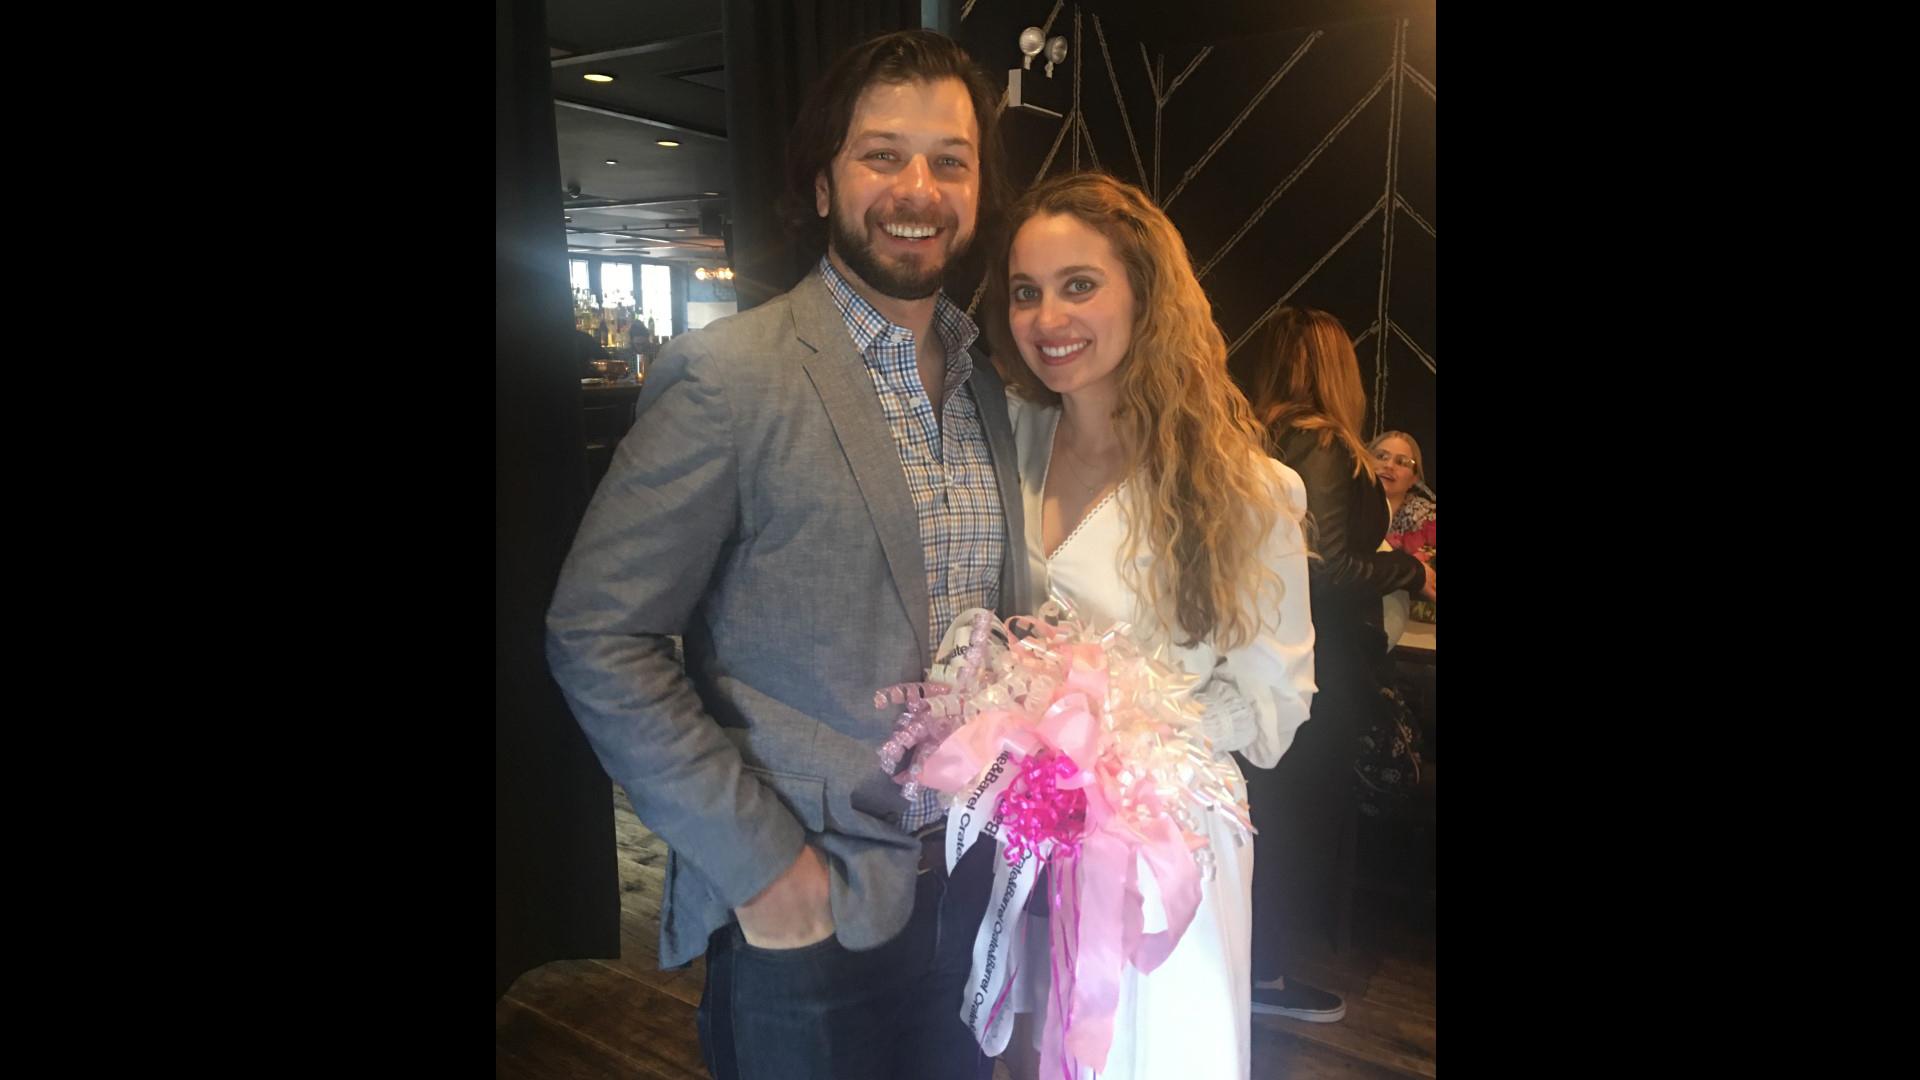 Debi Clark’s daughter, Tracy (right) plans to marry her fiancé Nick Musinski on July 24, 2020. The couple initially planned to wed on April 25, 2020 but the coronavirus pandemic led them to postpone their wedding. (Courtesy of Debi Clark)